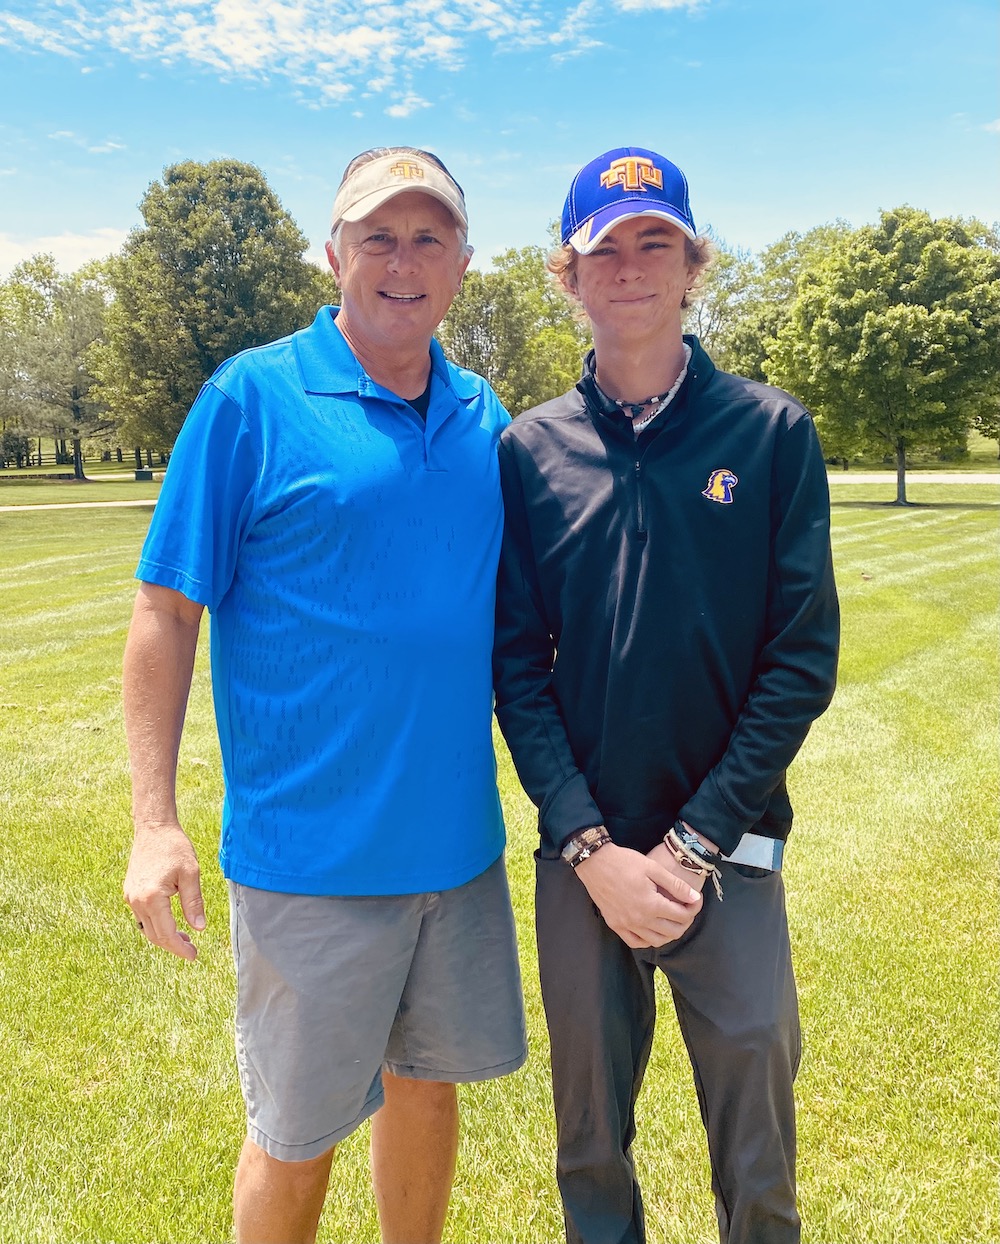 Darren Bassel and his son, Alexander, on the golf course